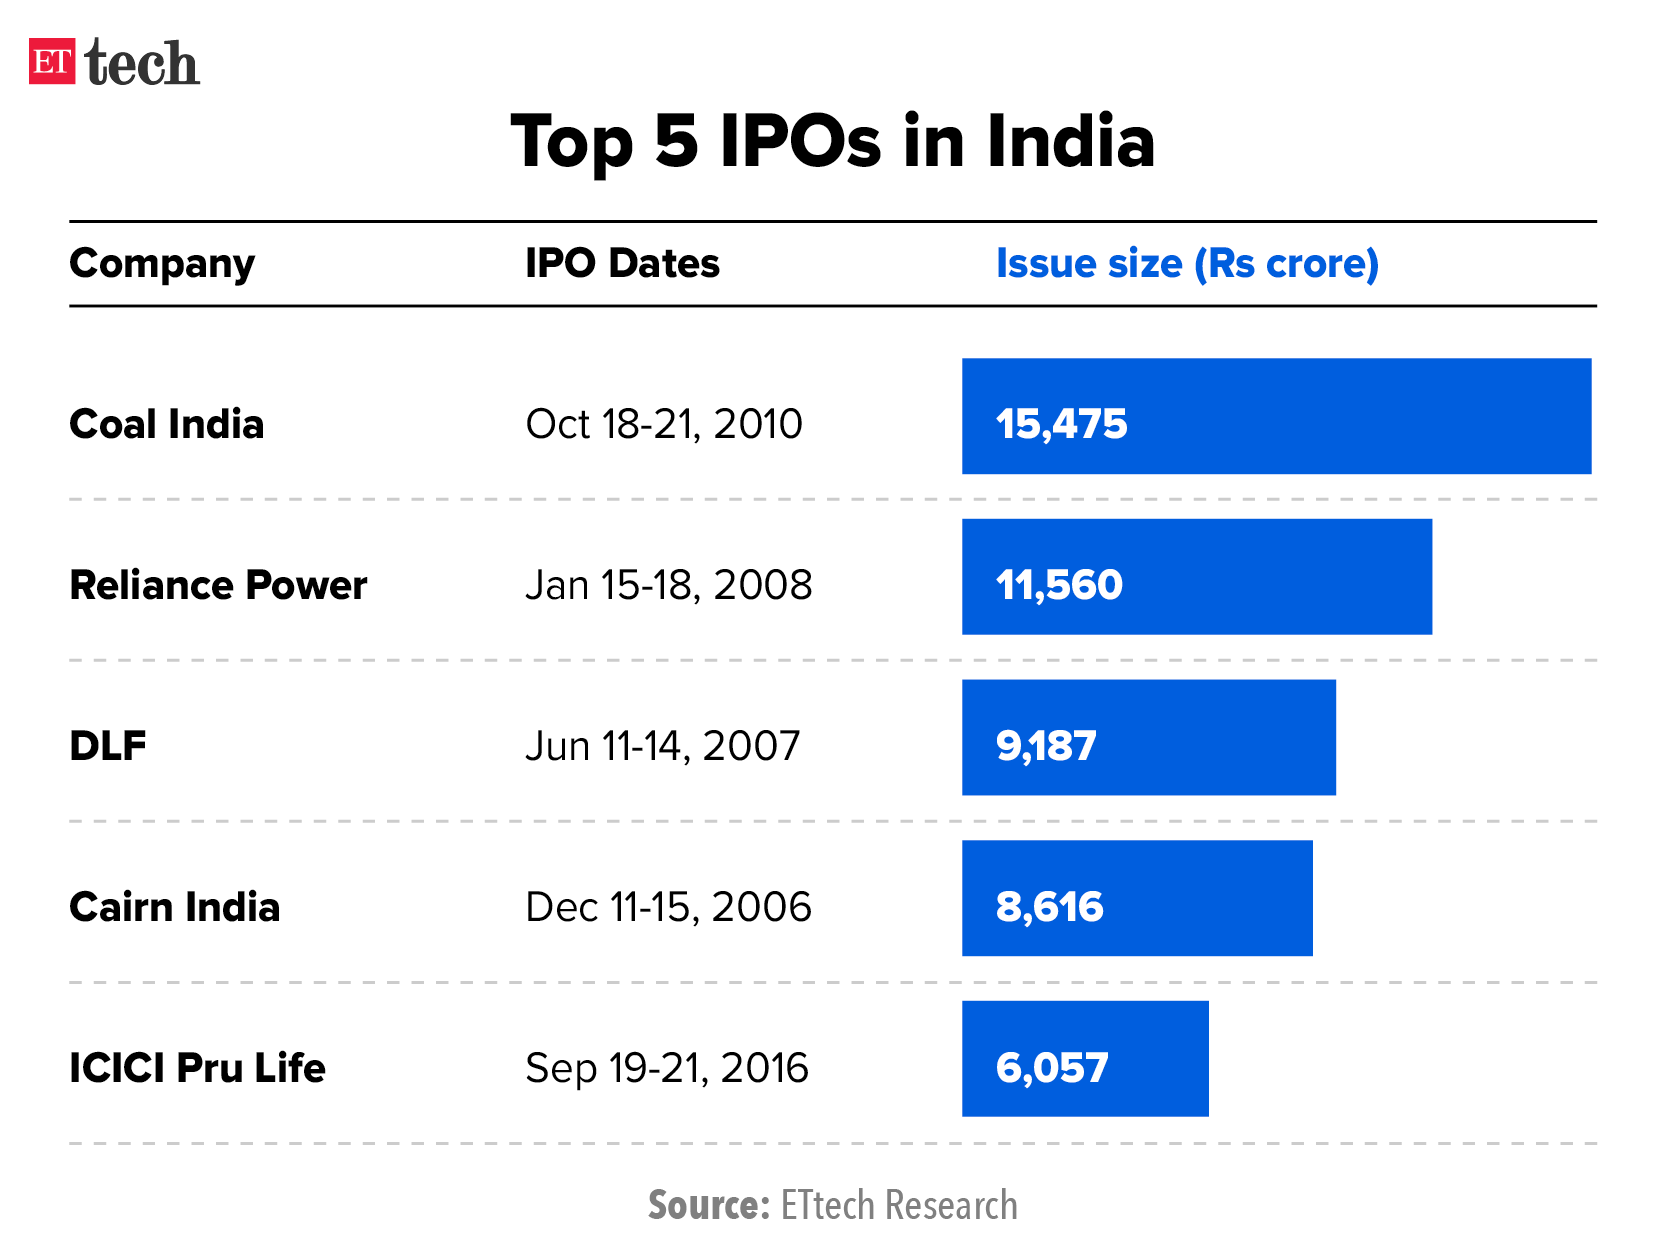 Top 5 IPOs in India